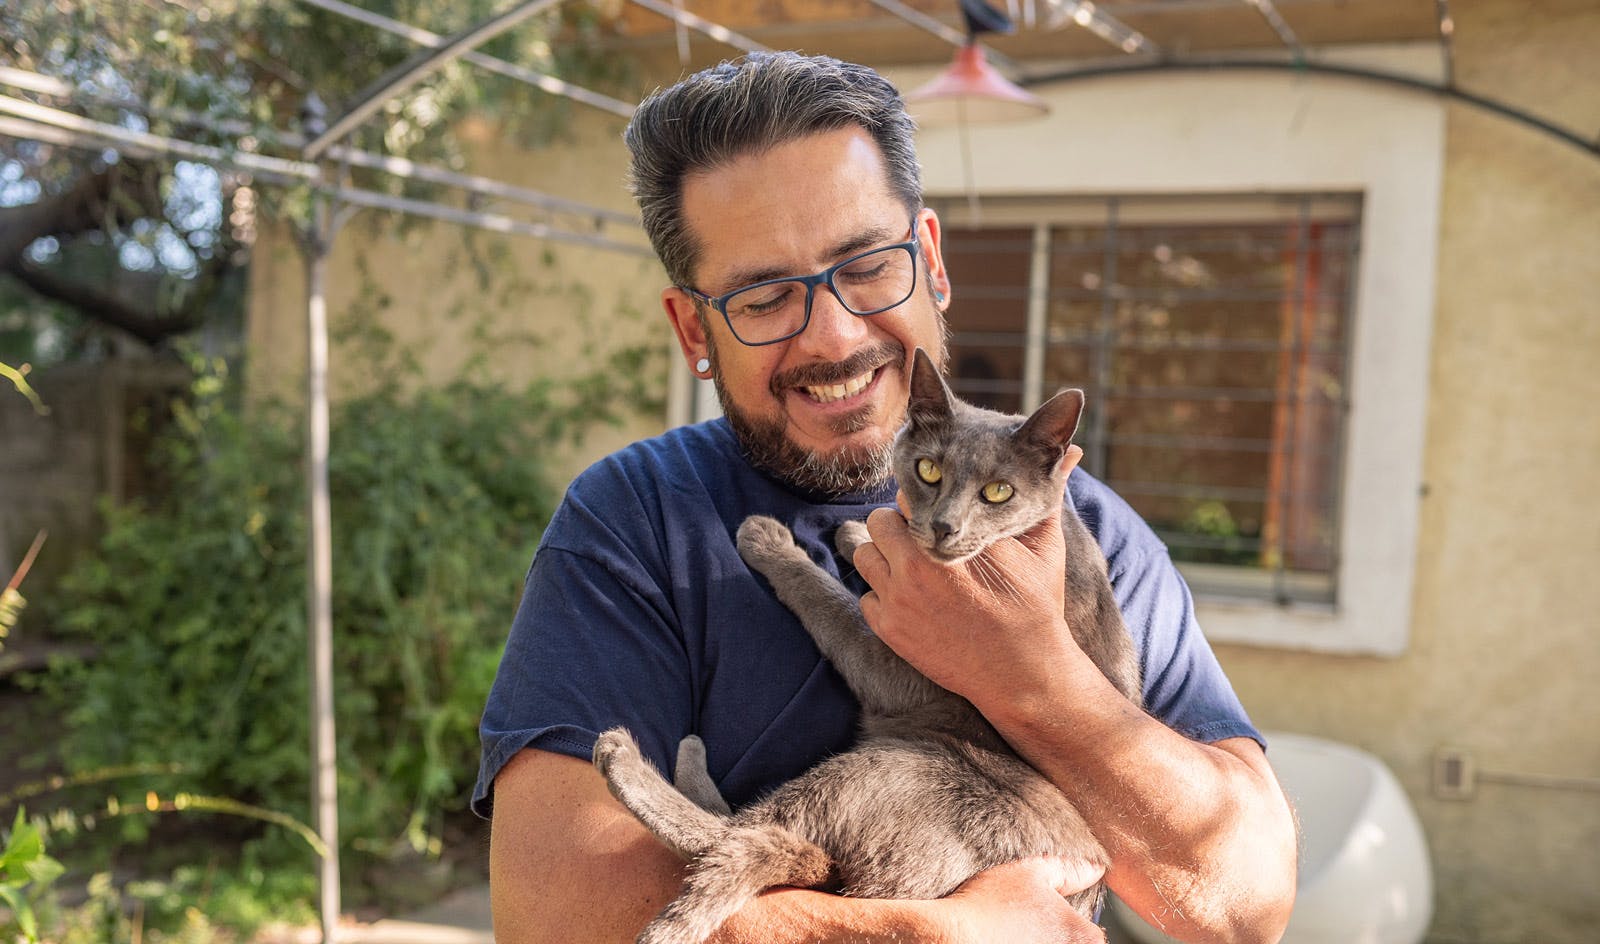 A bearded caucasian man with dark hair and glasses holding a grey cat and smiling in his backyard.  “I regularly discuss quality of life, and where I want my wellbeing to be, with my doctor.” “I regularly discuss quality of life, and where I want my wellbeing to be, with my doctor.” Sam, living with HIV